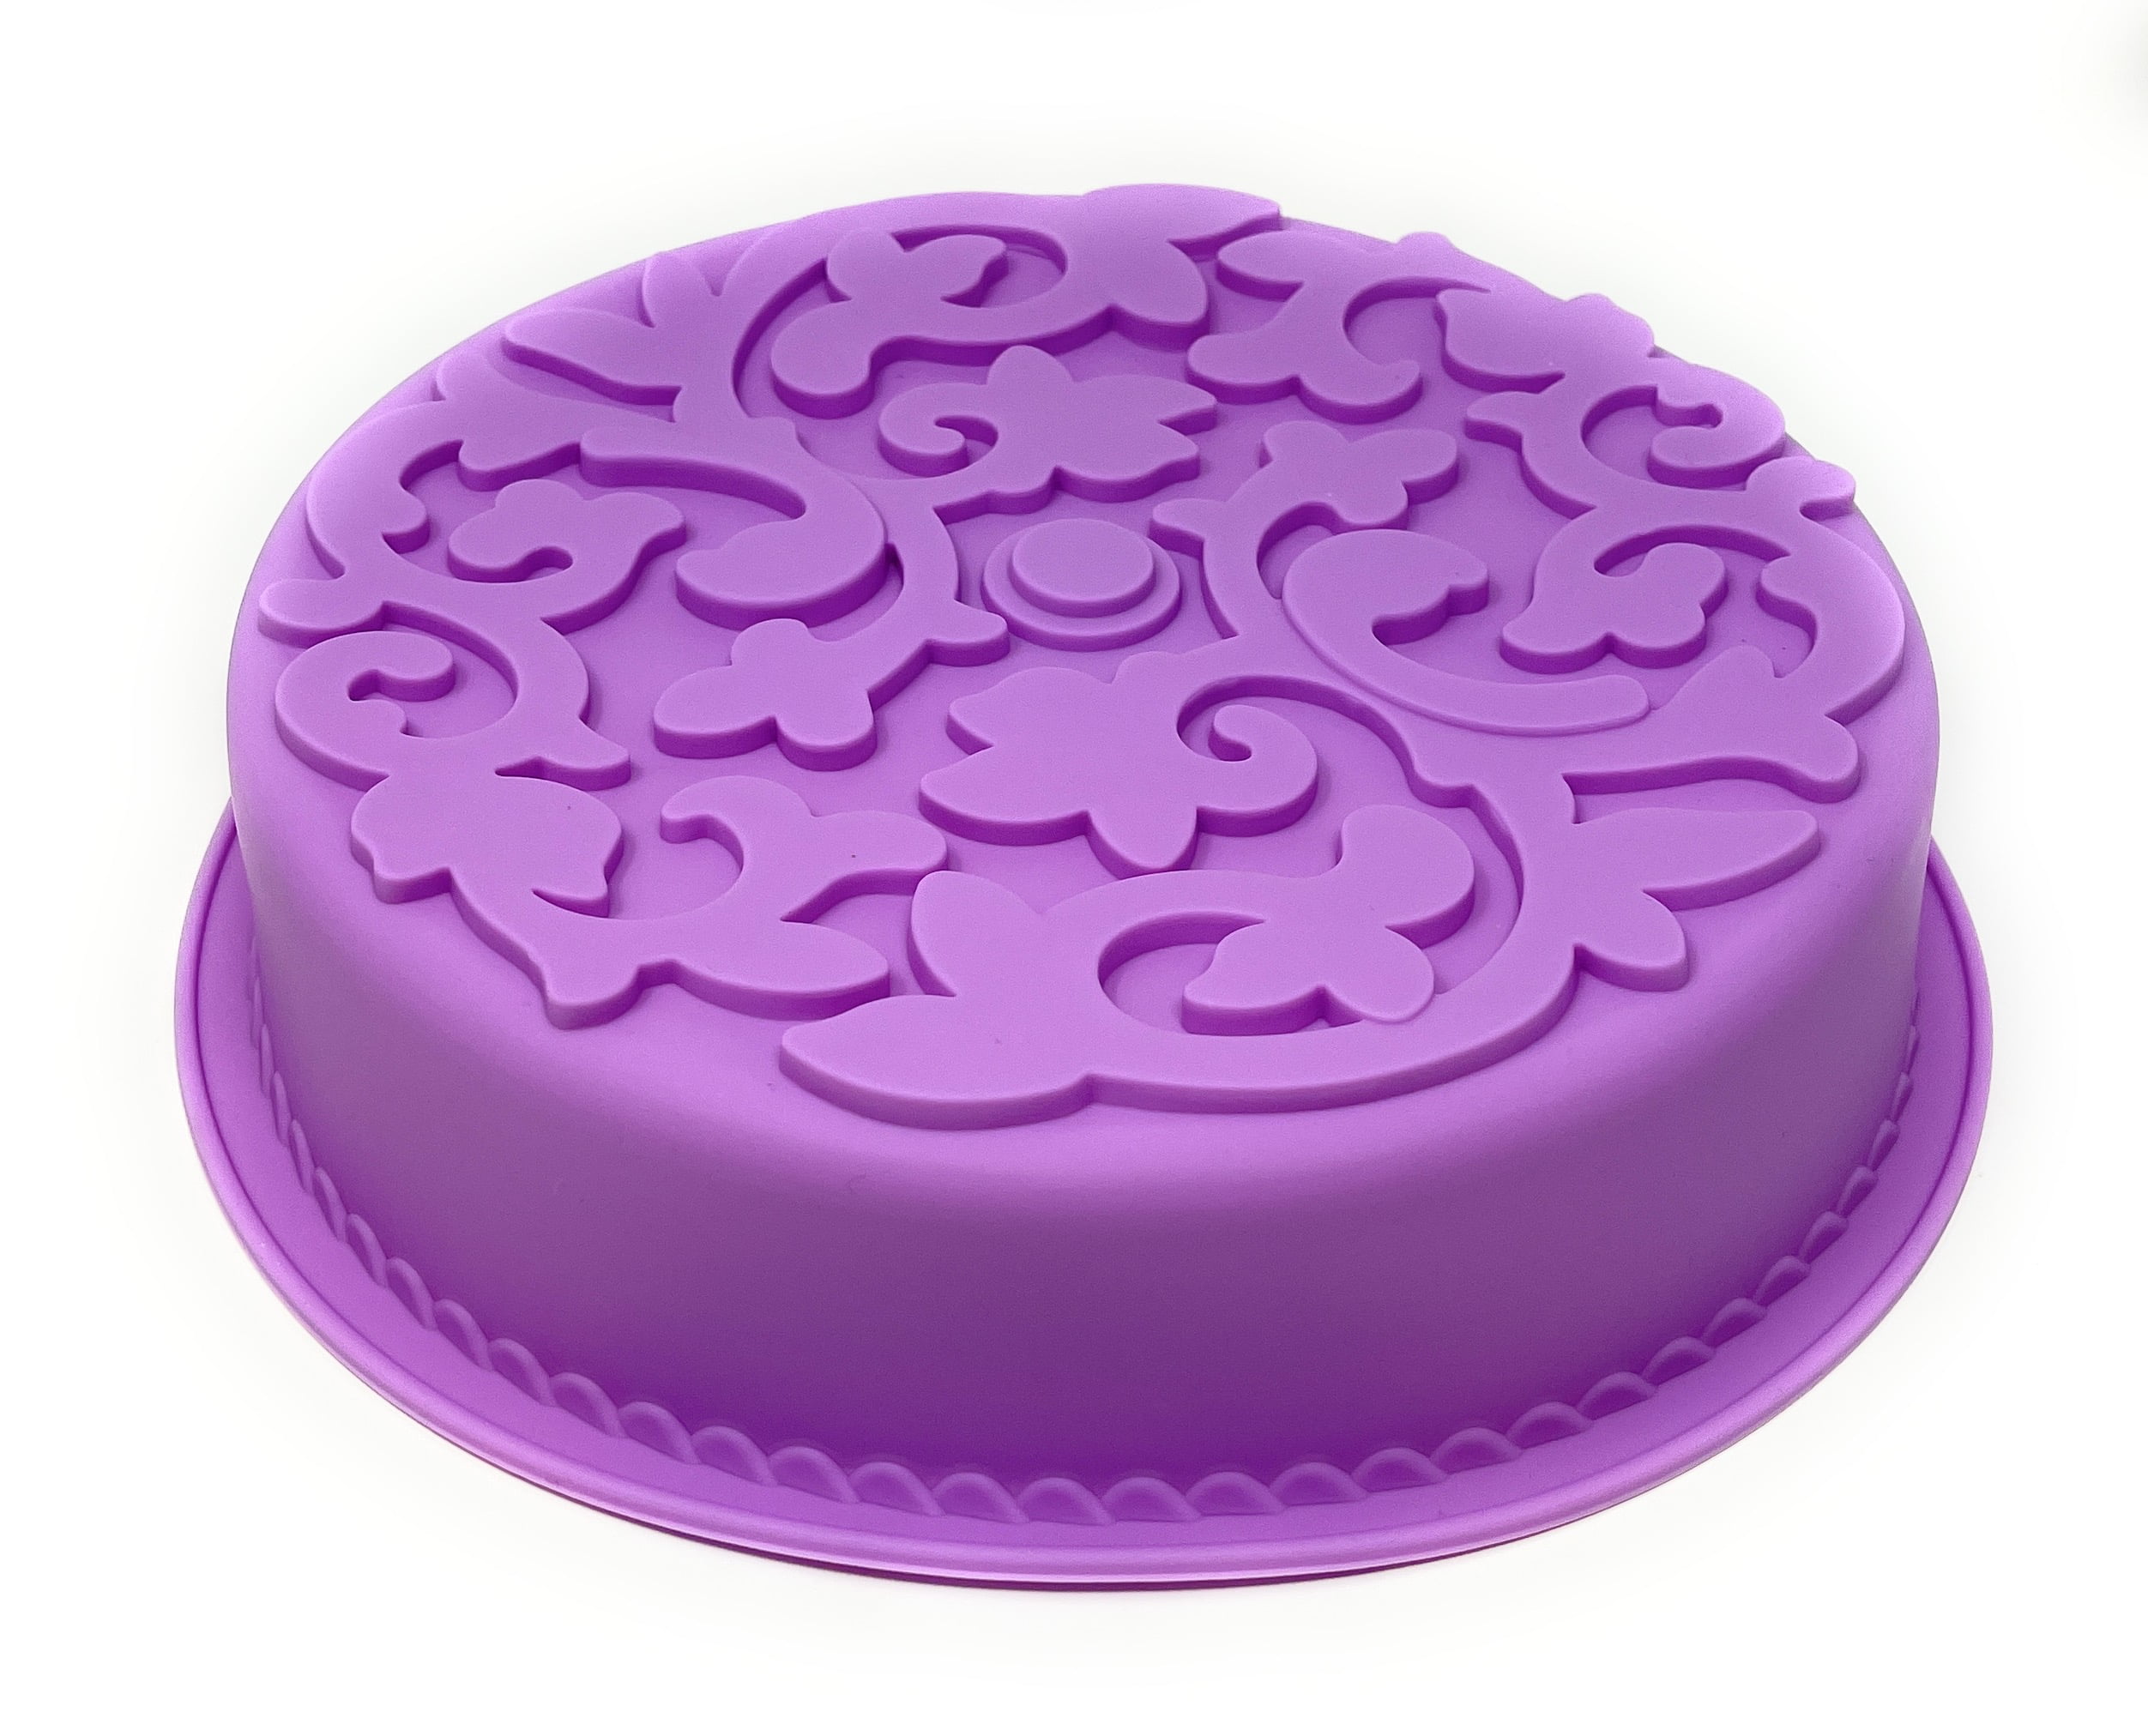 Wilton Silicone Bakeware, 12 Cavity Rose Candy Mold, 2115-8516